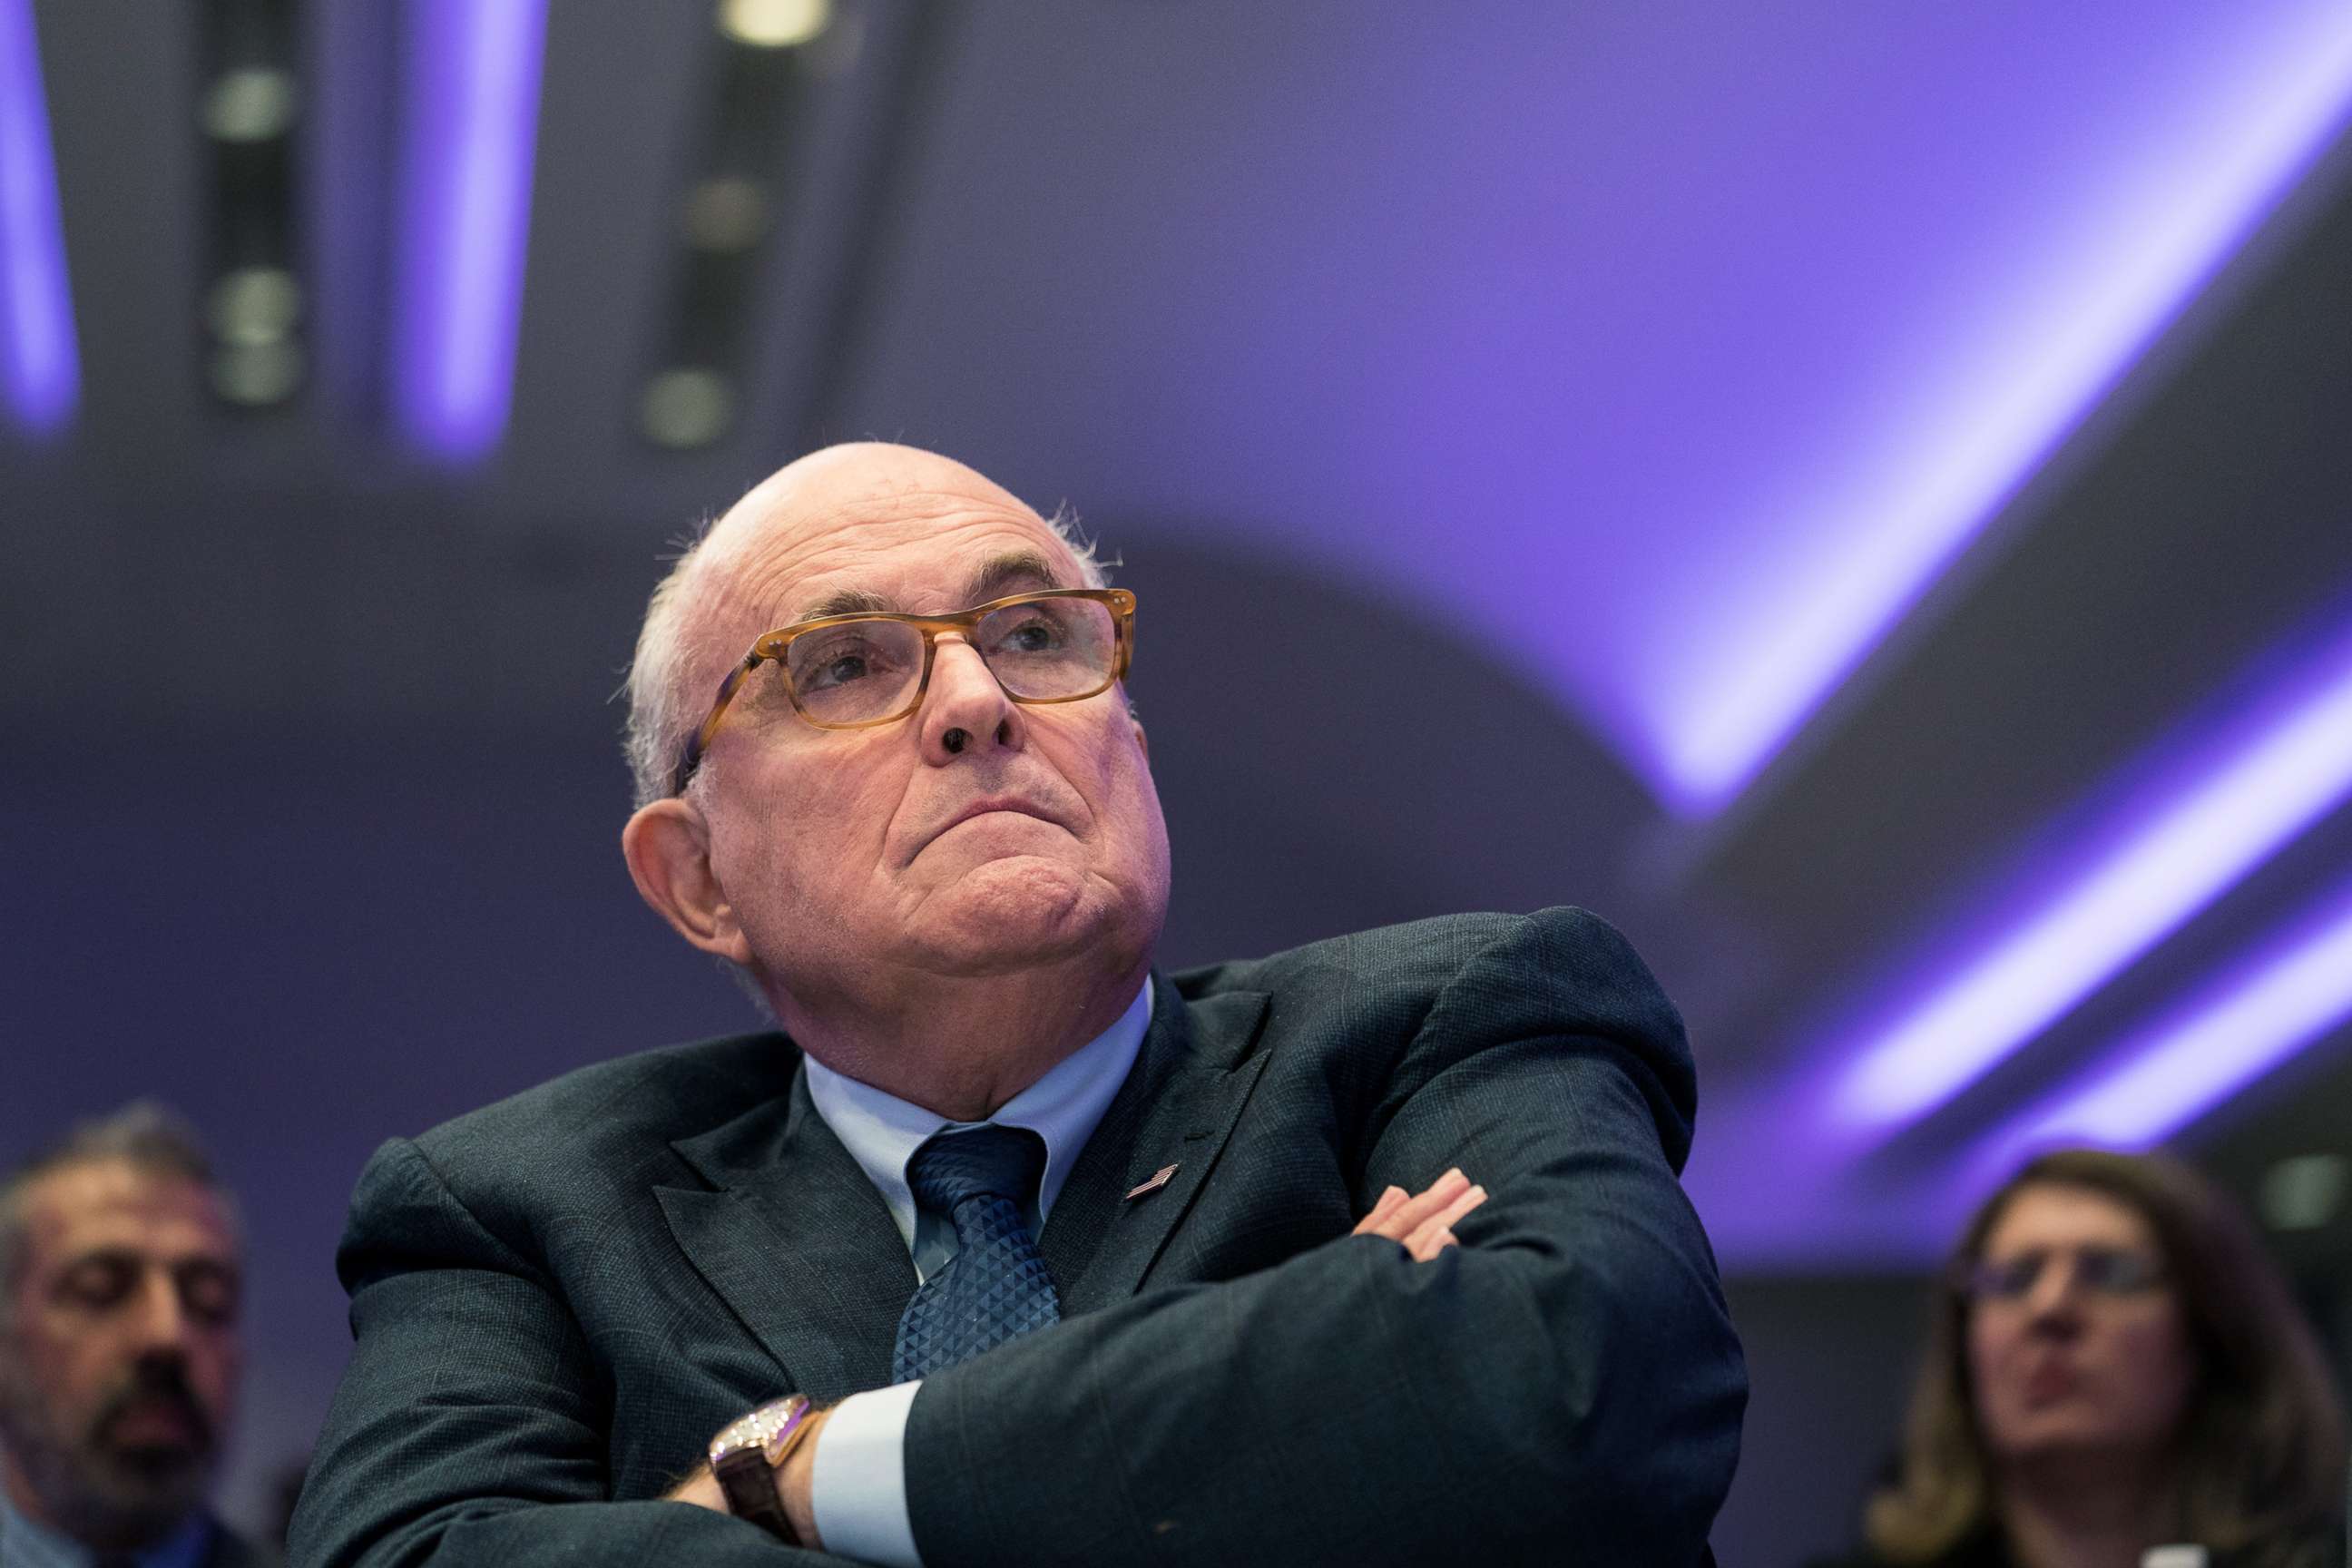 PHOTO: Rudy Giuliani, President Donald Trump's personal lawyer, attends an event in Washington, D.C., May 5, 2018.